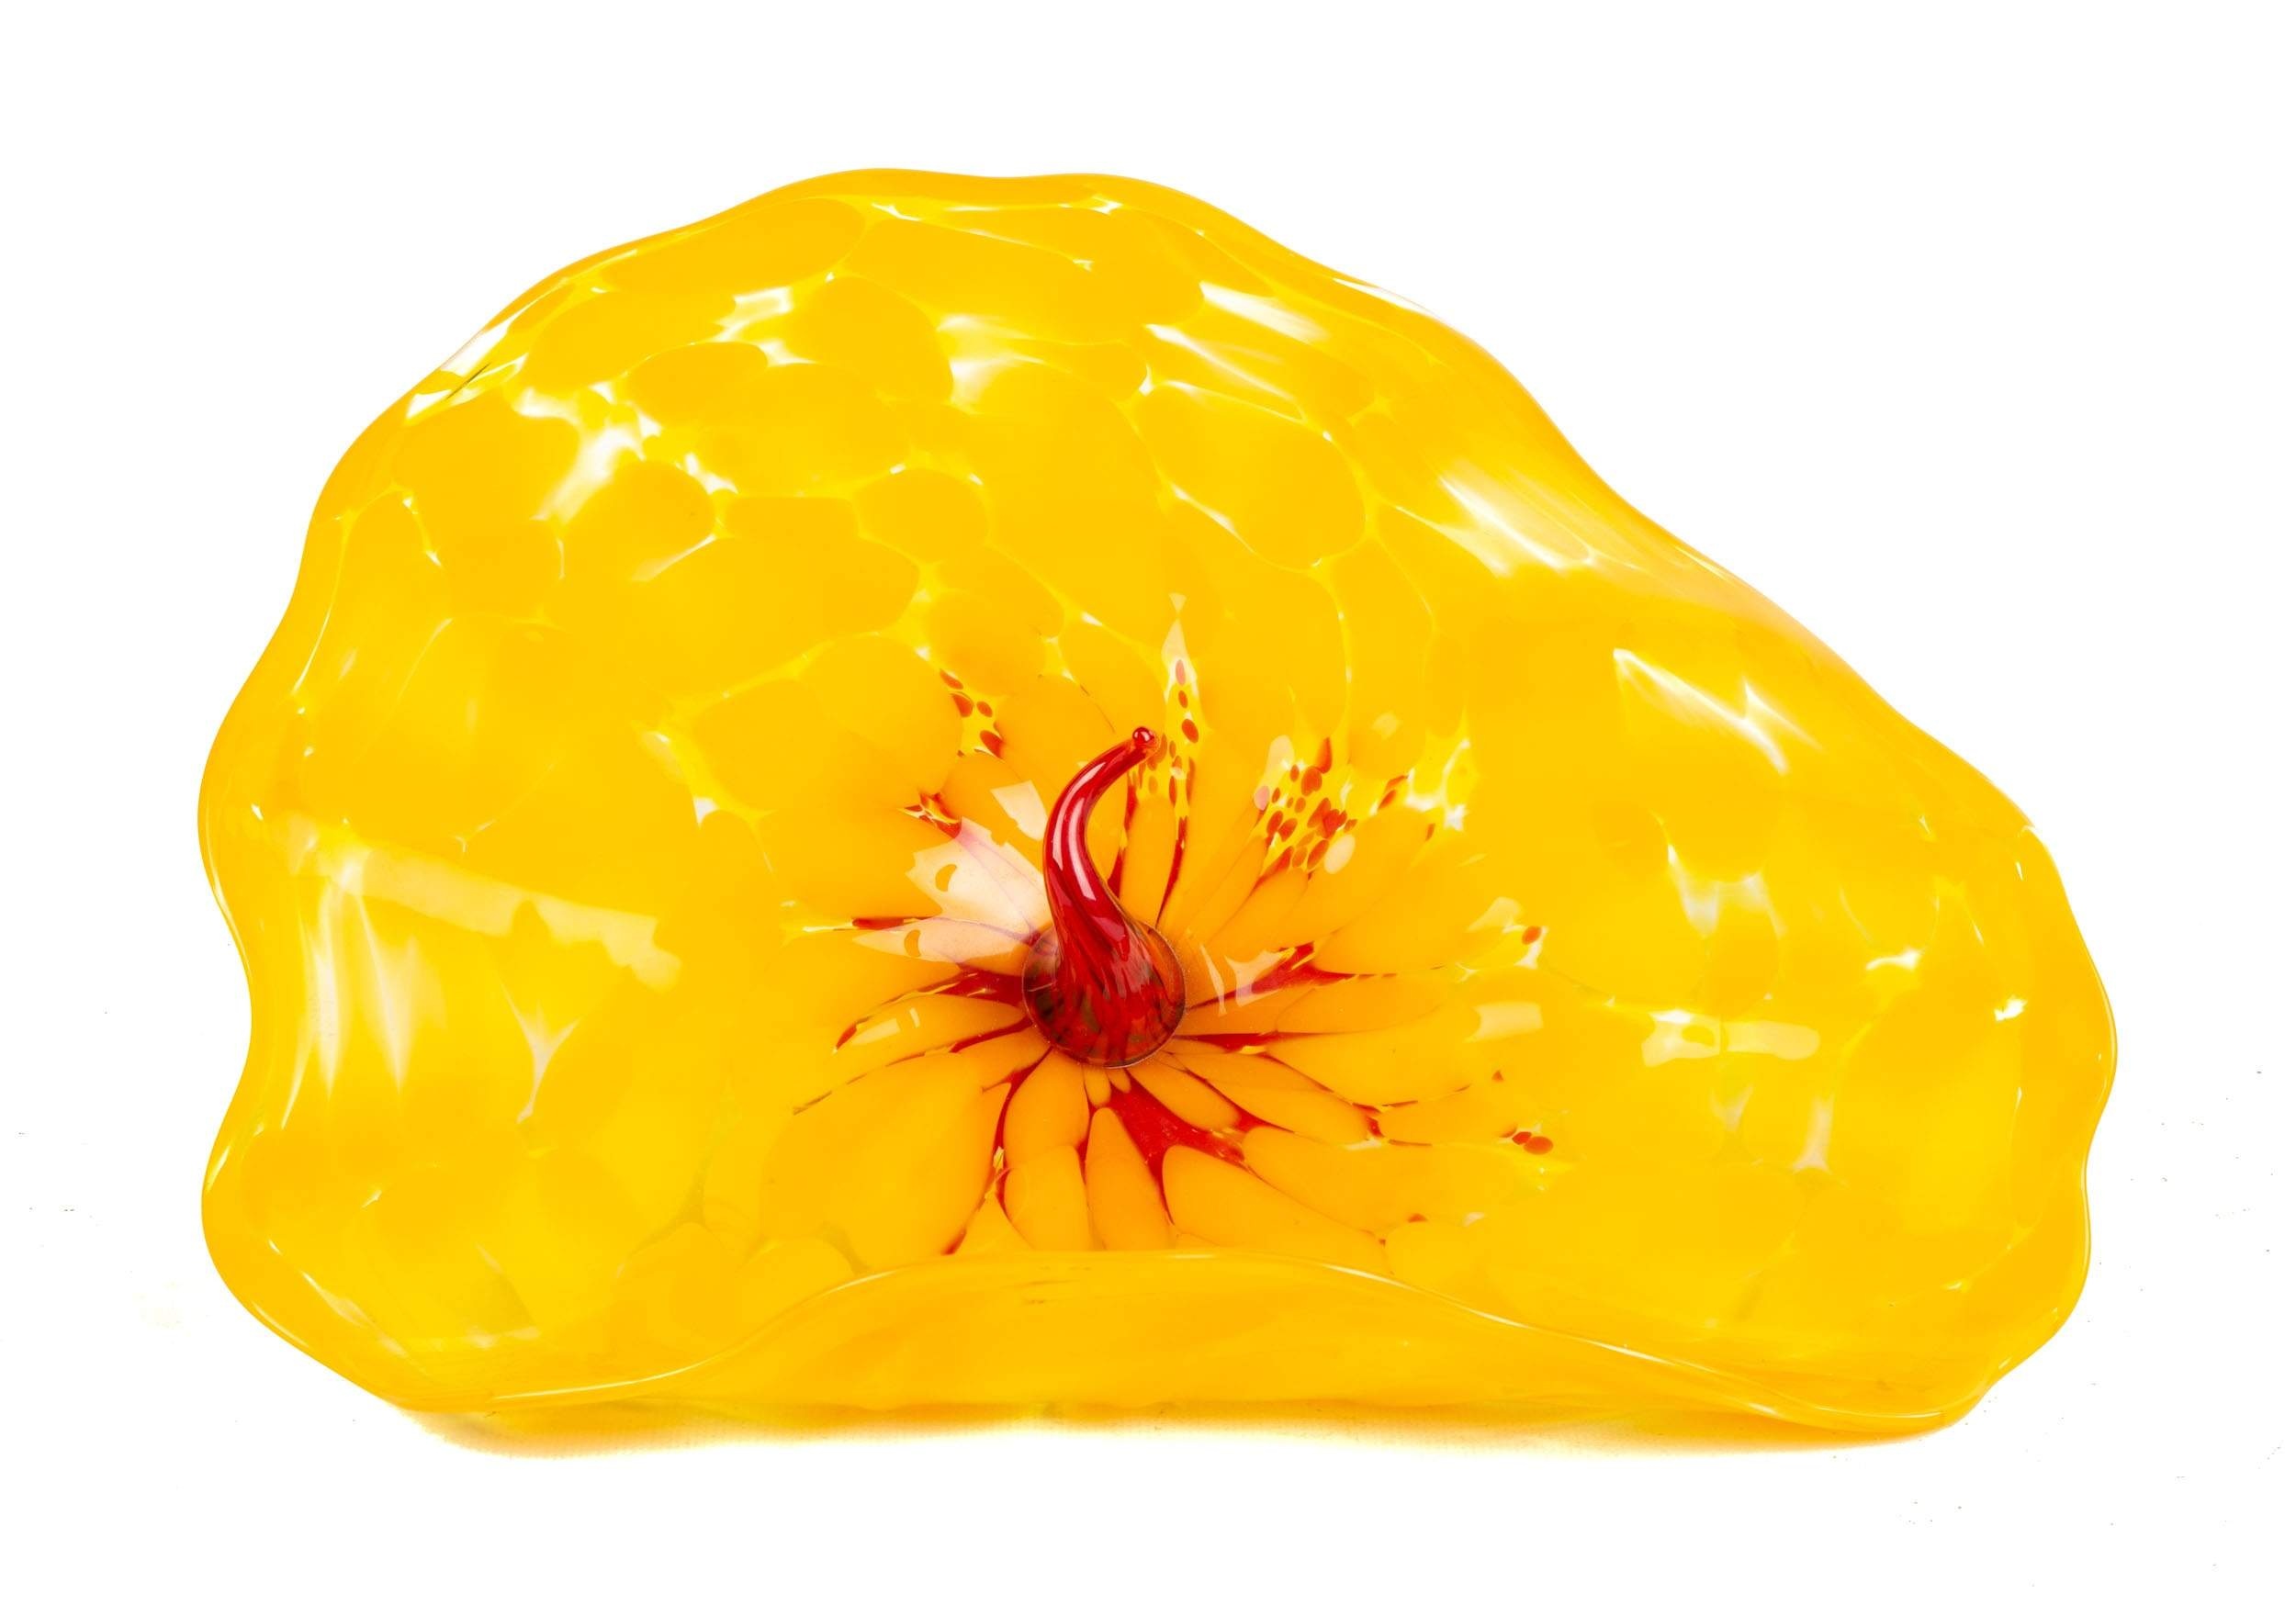 ​Dale Chihuly "Bel Fiore" Glass Sculpture